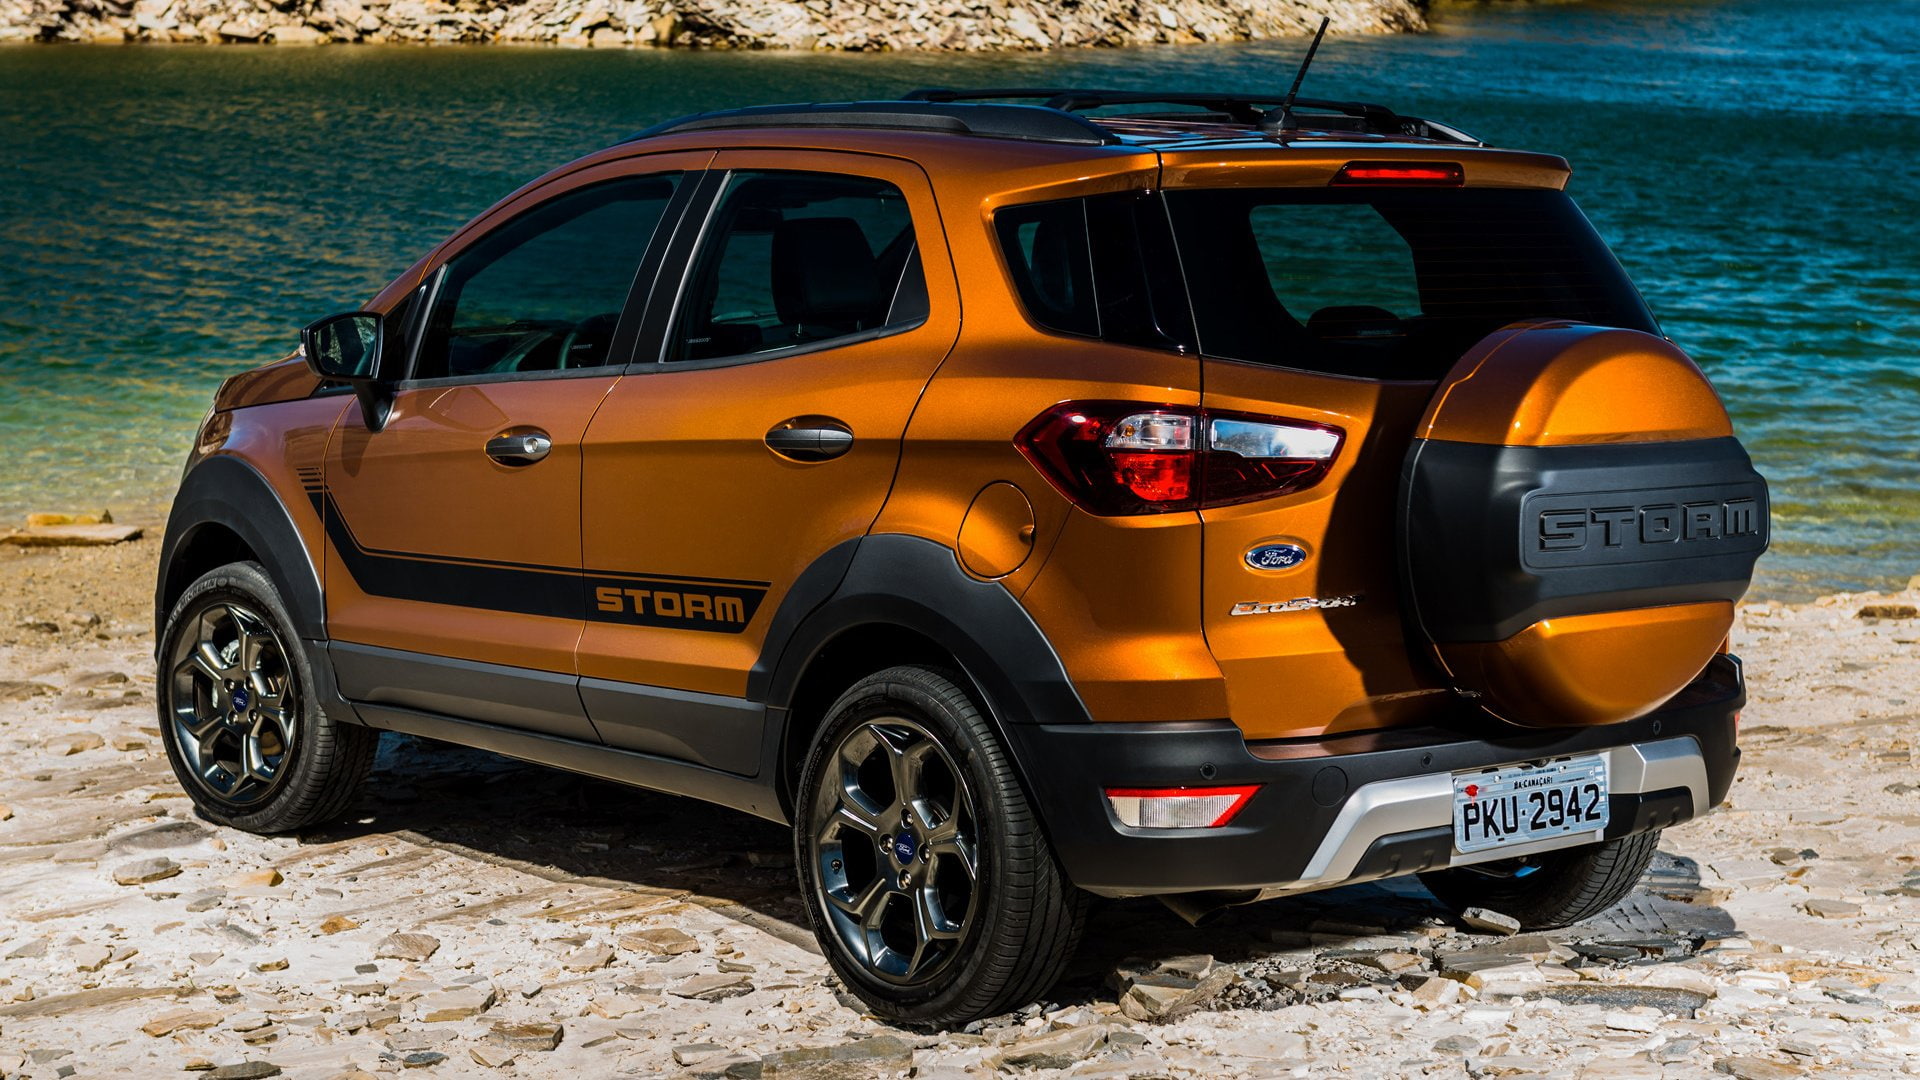 Ford, Ford EcoSport Storm, Brown Car, Crossover Car, SUV, Subcompact Car